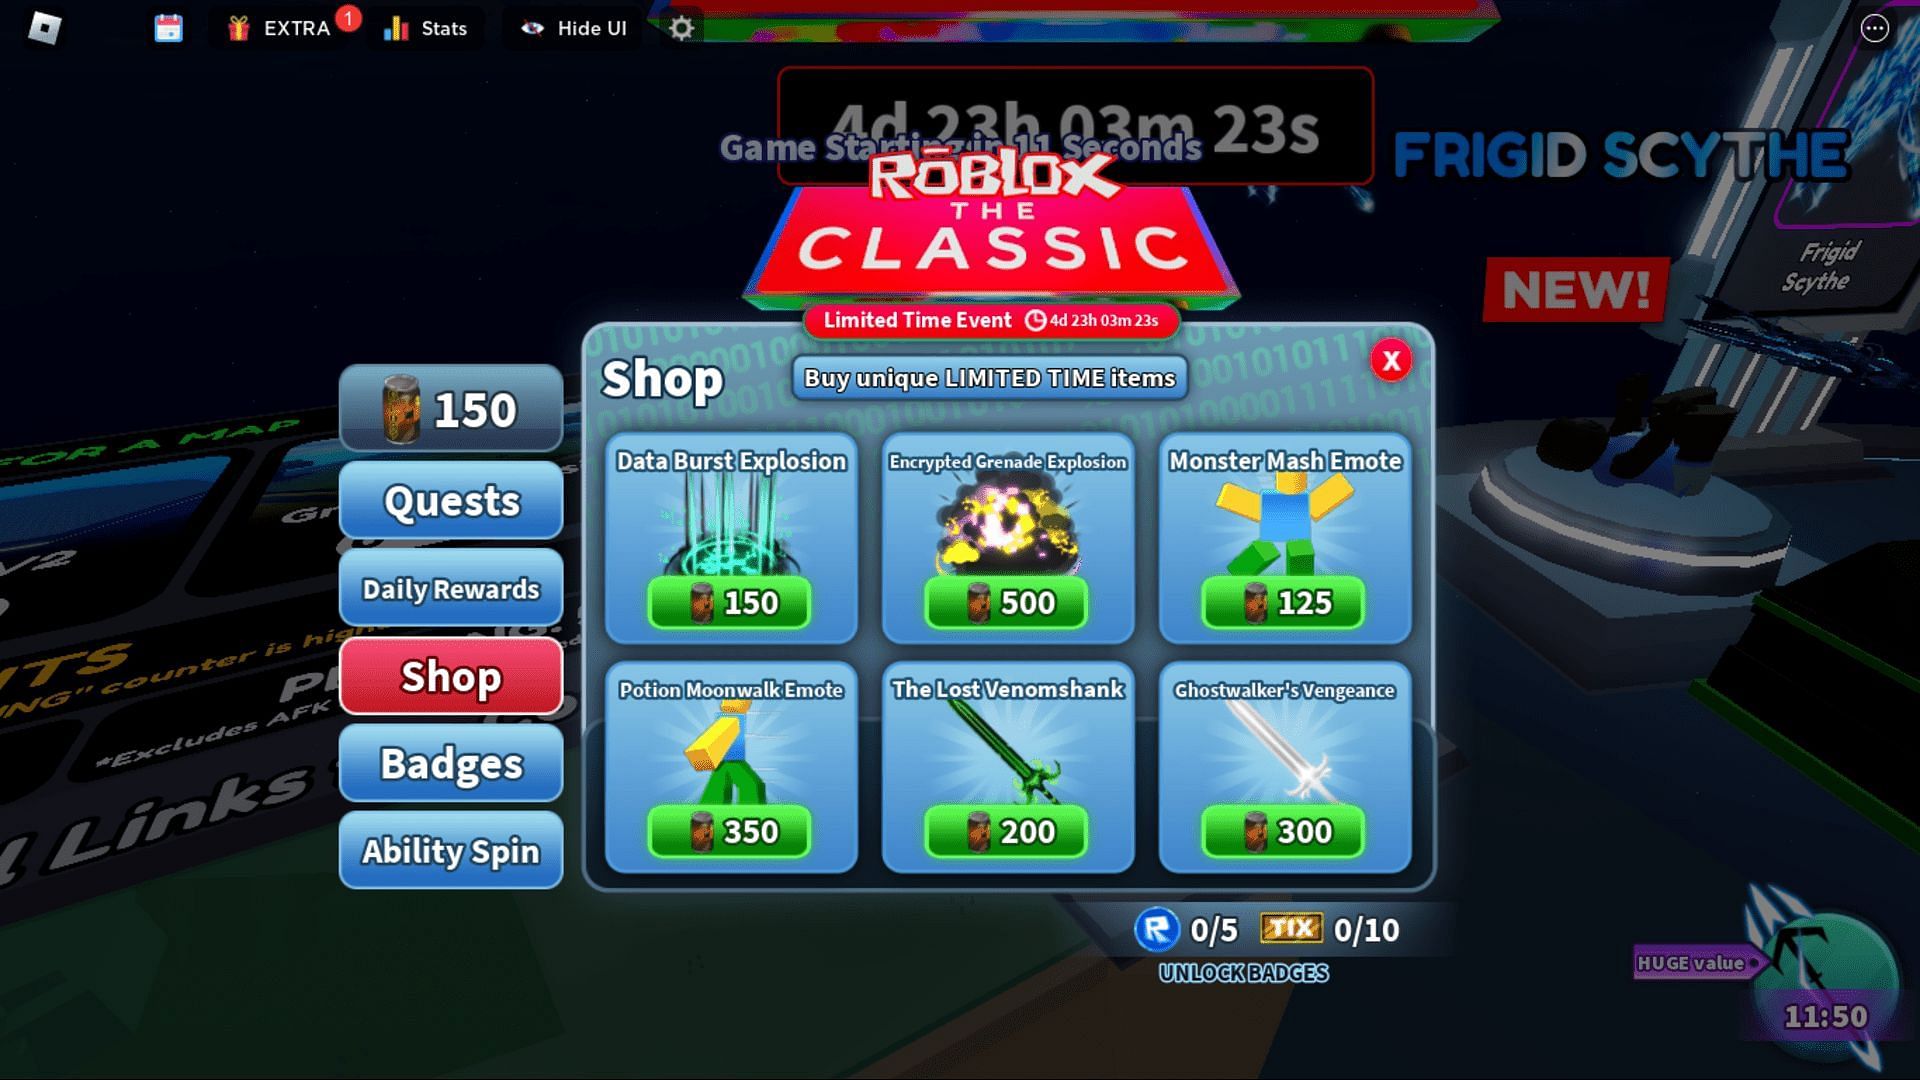 The Classic event Blade Ball in-game shop